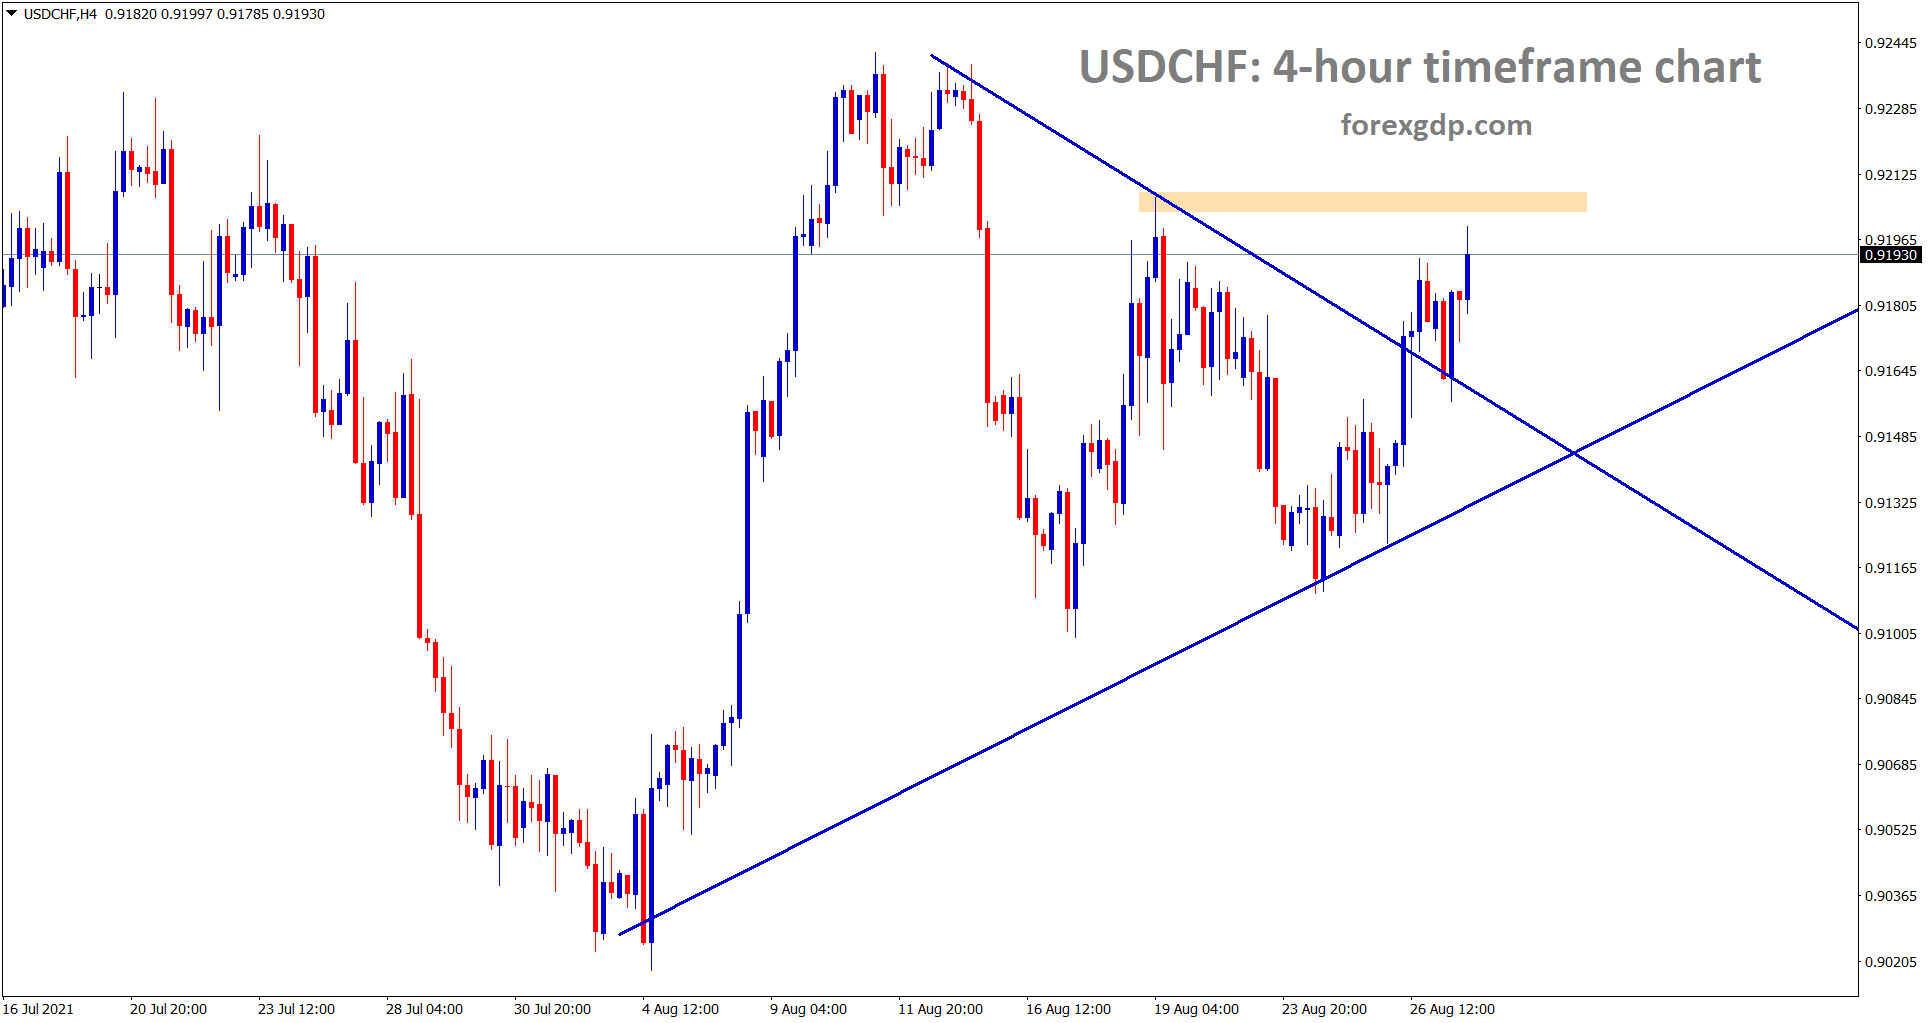 USDCHF is near to the resistance after breaking the symmetrical triangle pattern